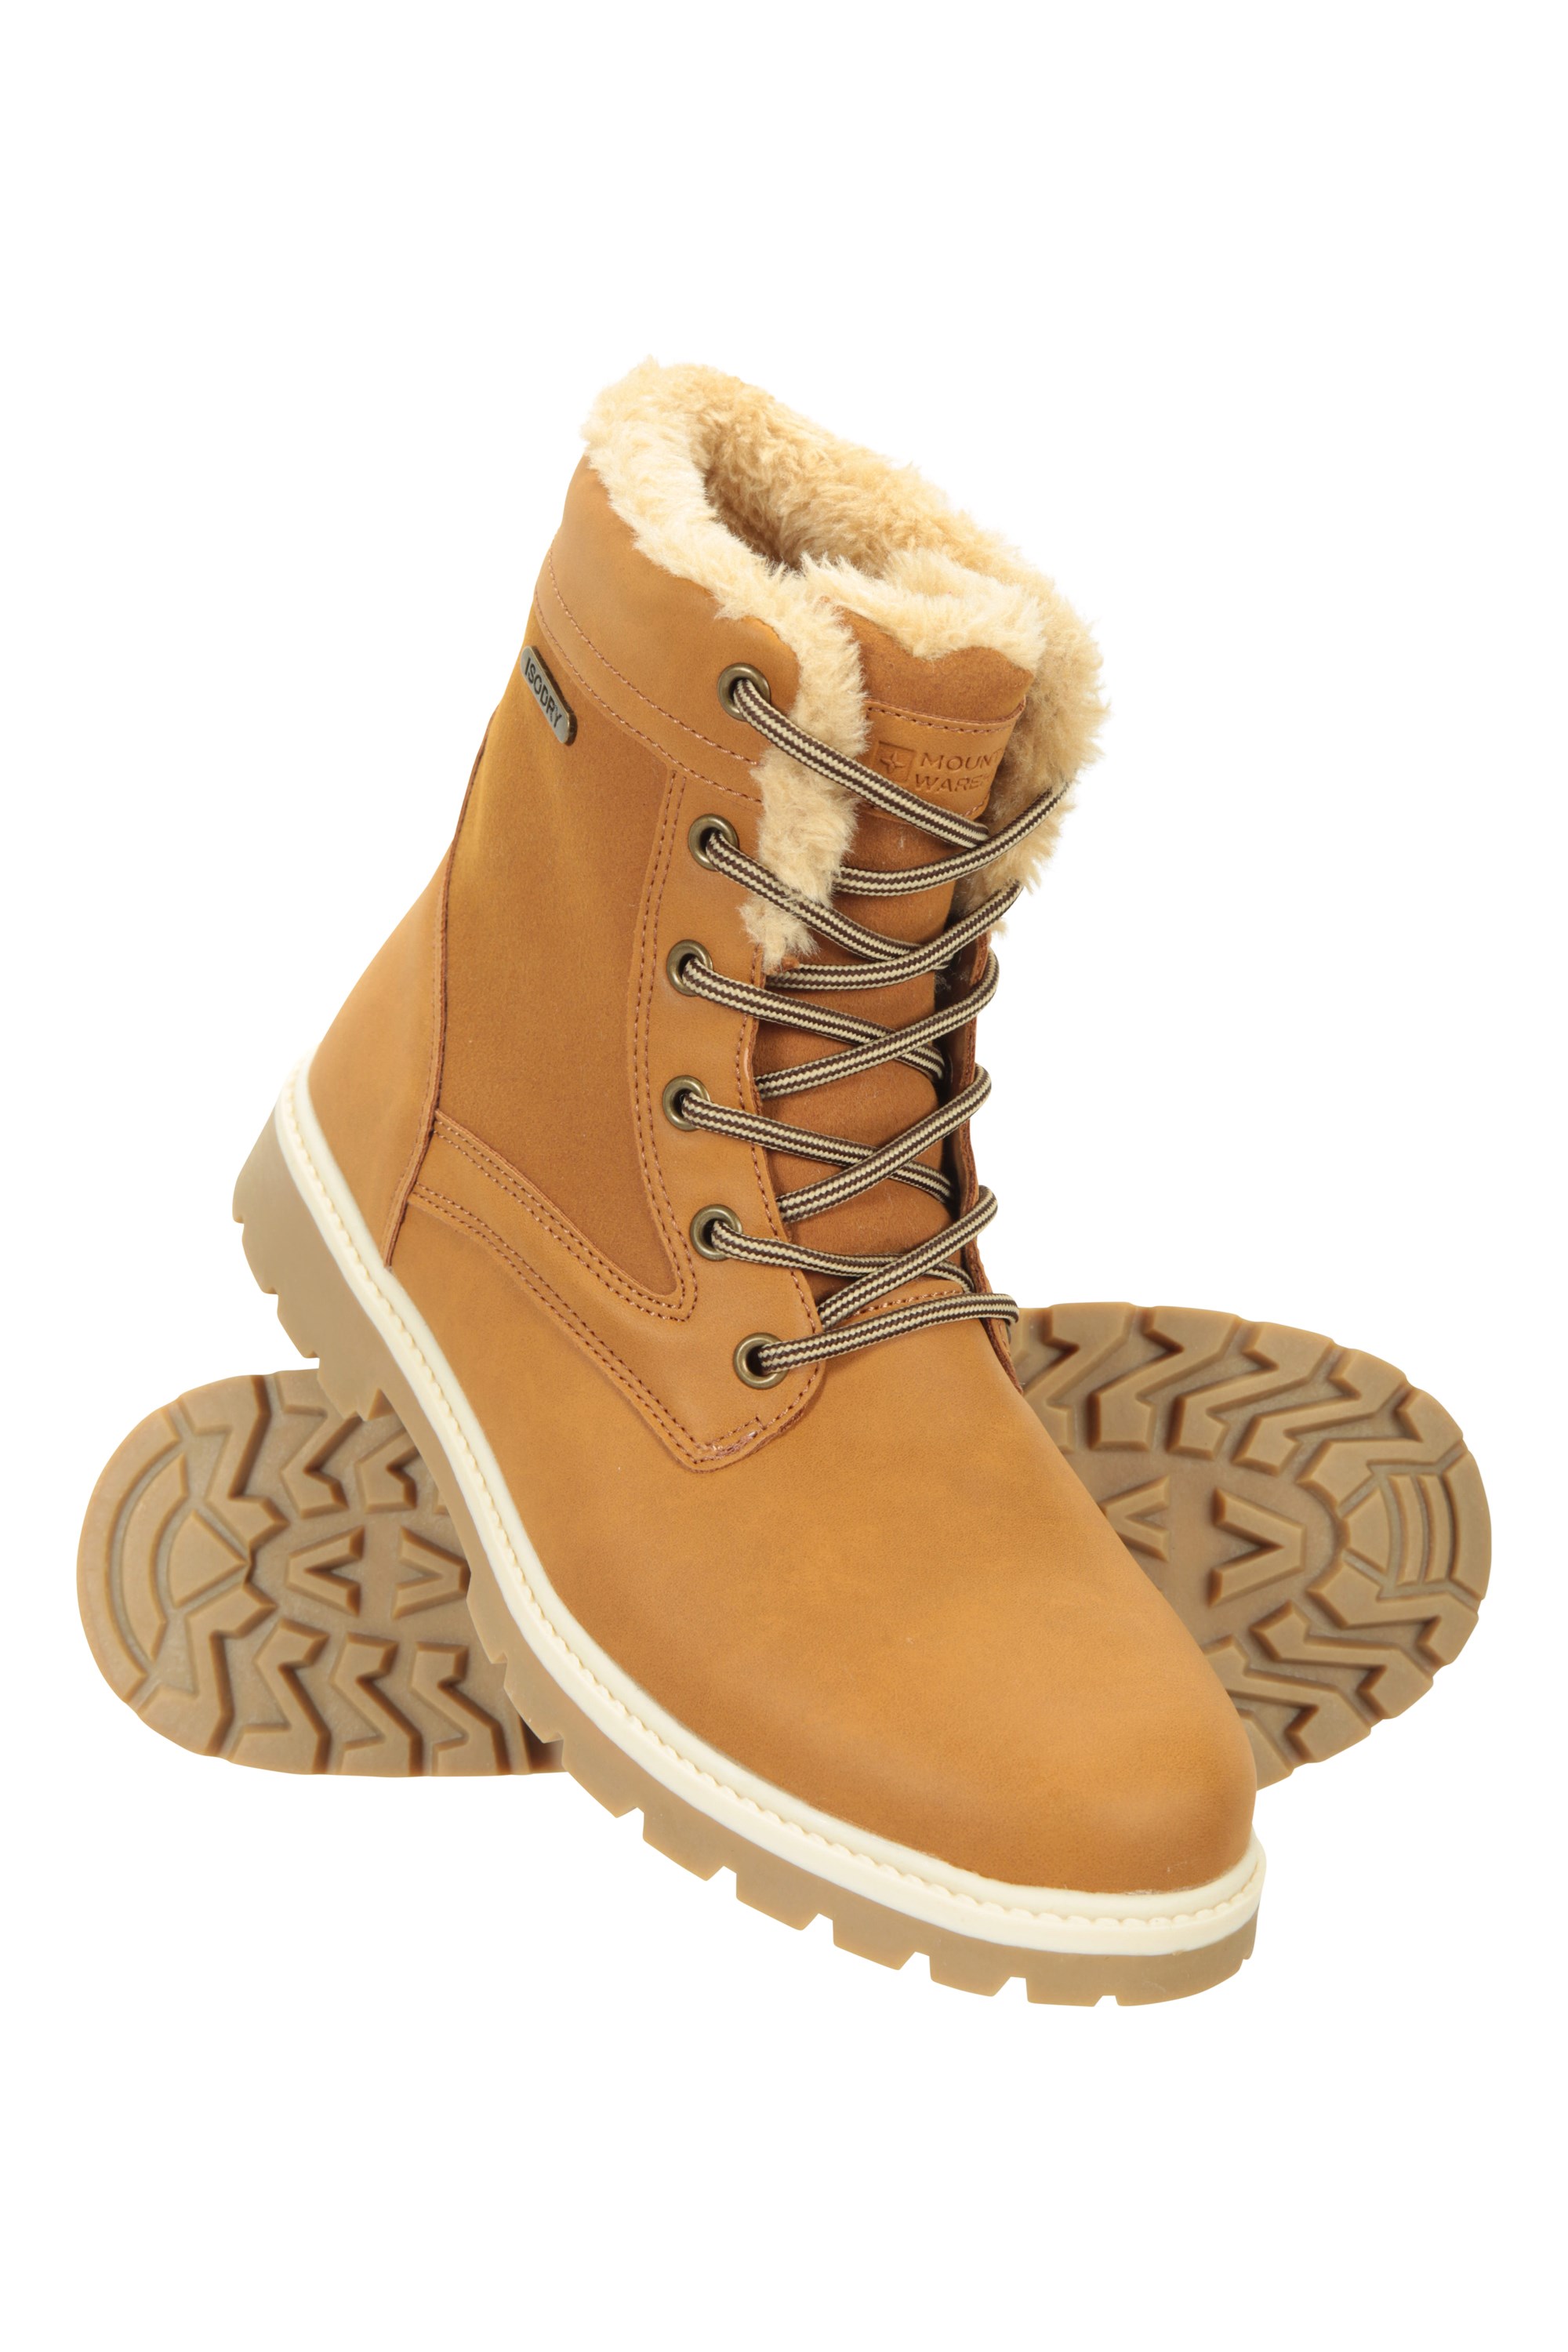 Womens Casual Thermal Waterproof Boots